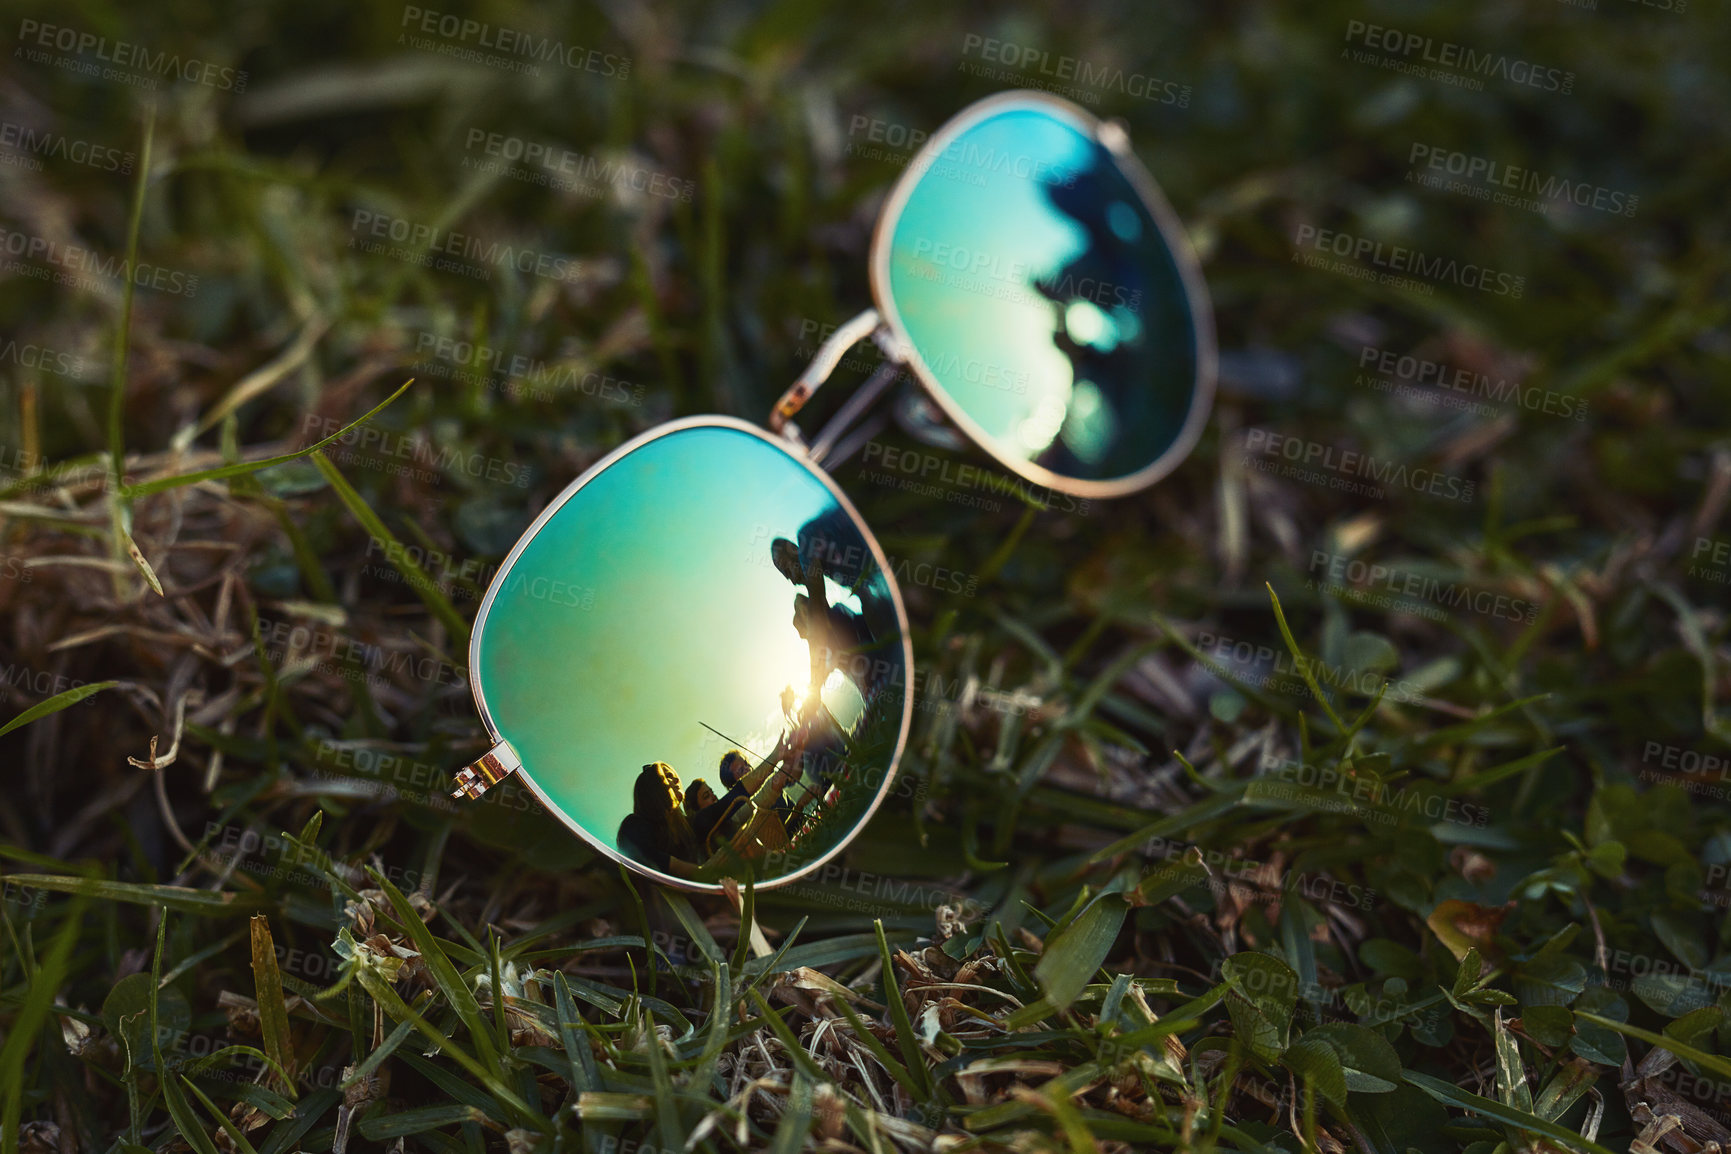 Buy stock photo High angle shot of sunglasses on a lawn